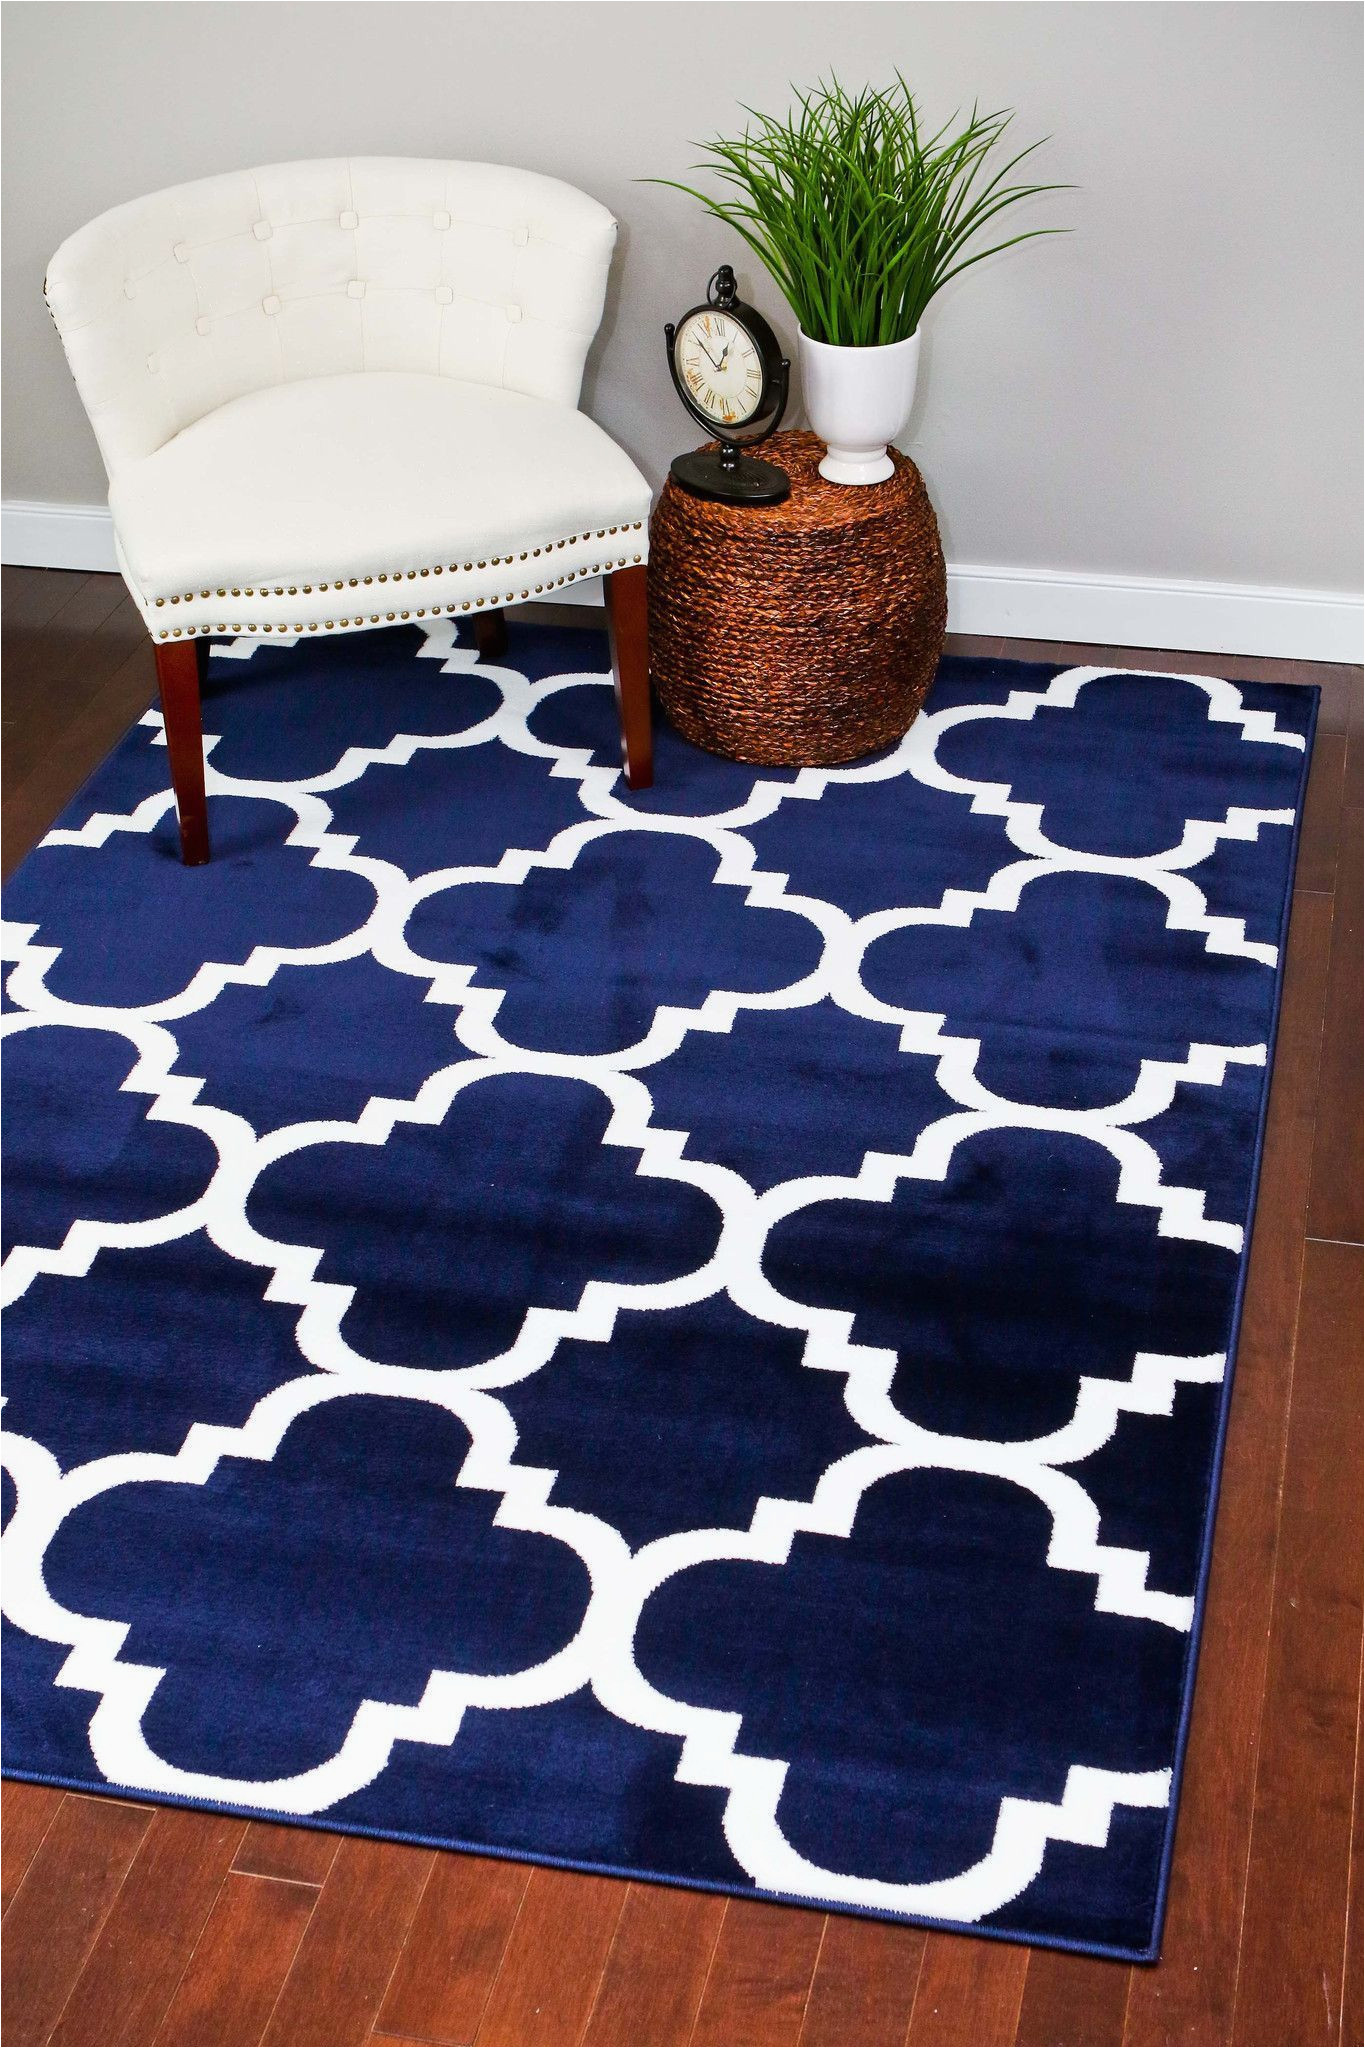 Blue and Navy Rug 4518 Navy Blue Blue Living Room Home Decor Rugs In